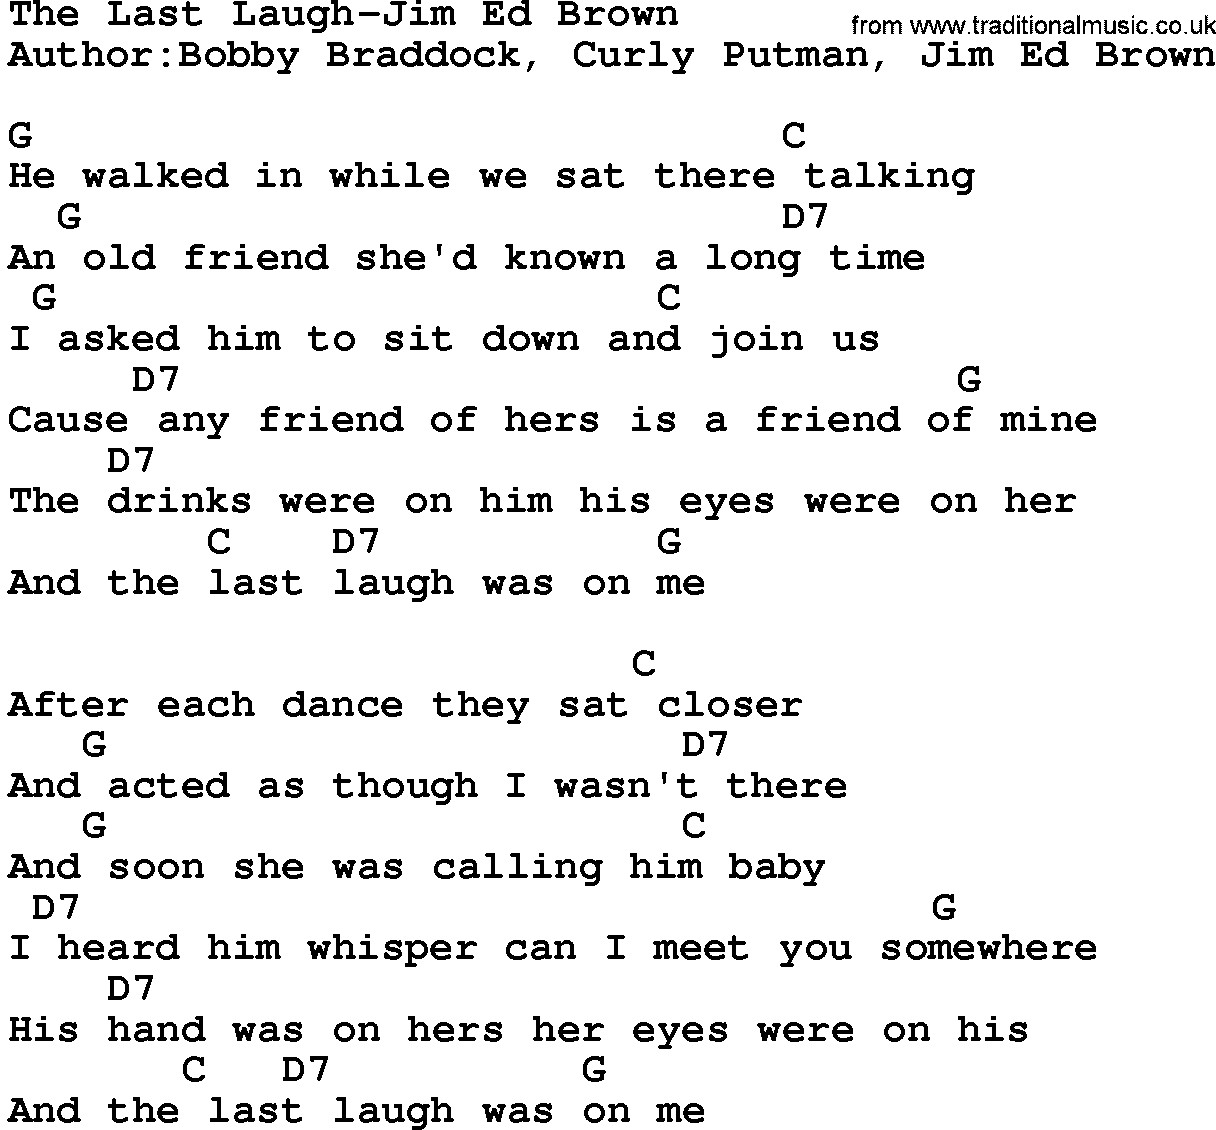 Country music song: The Last Laugh-Jim Ed Brown  lyrics and chords